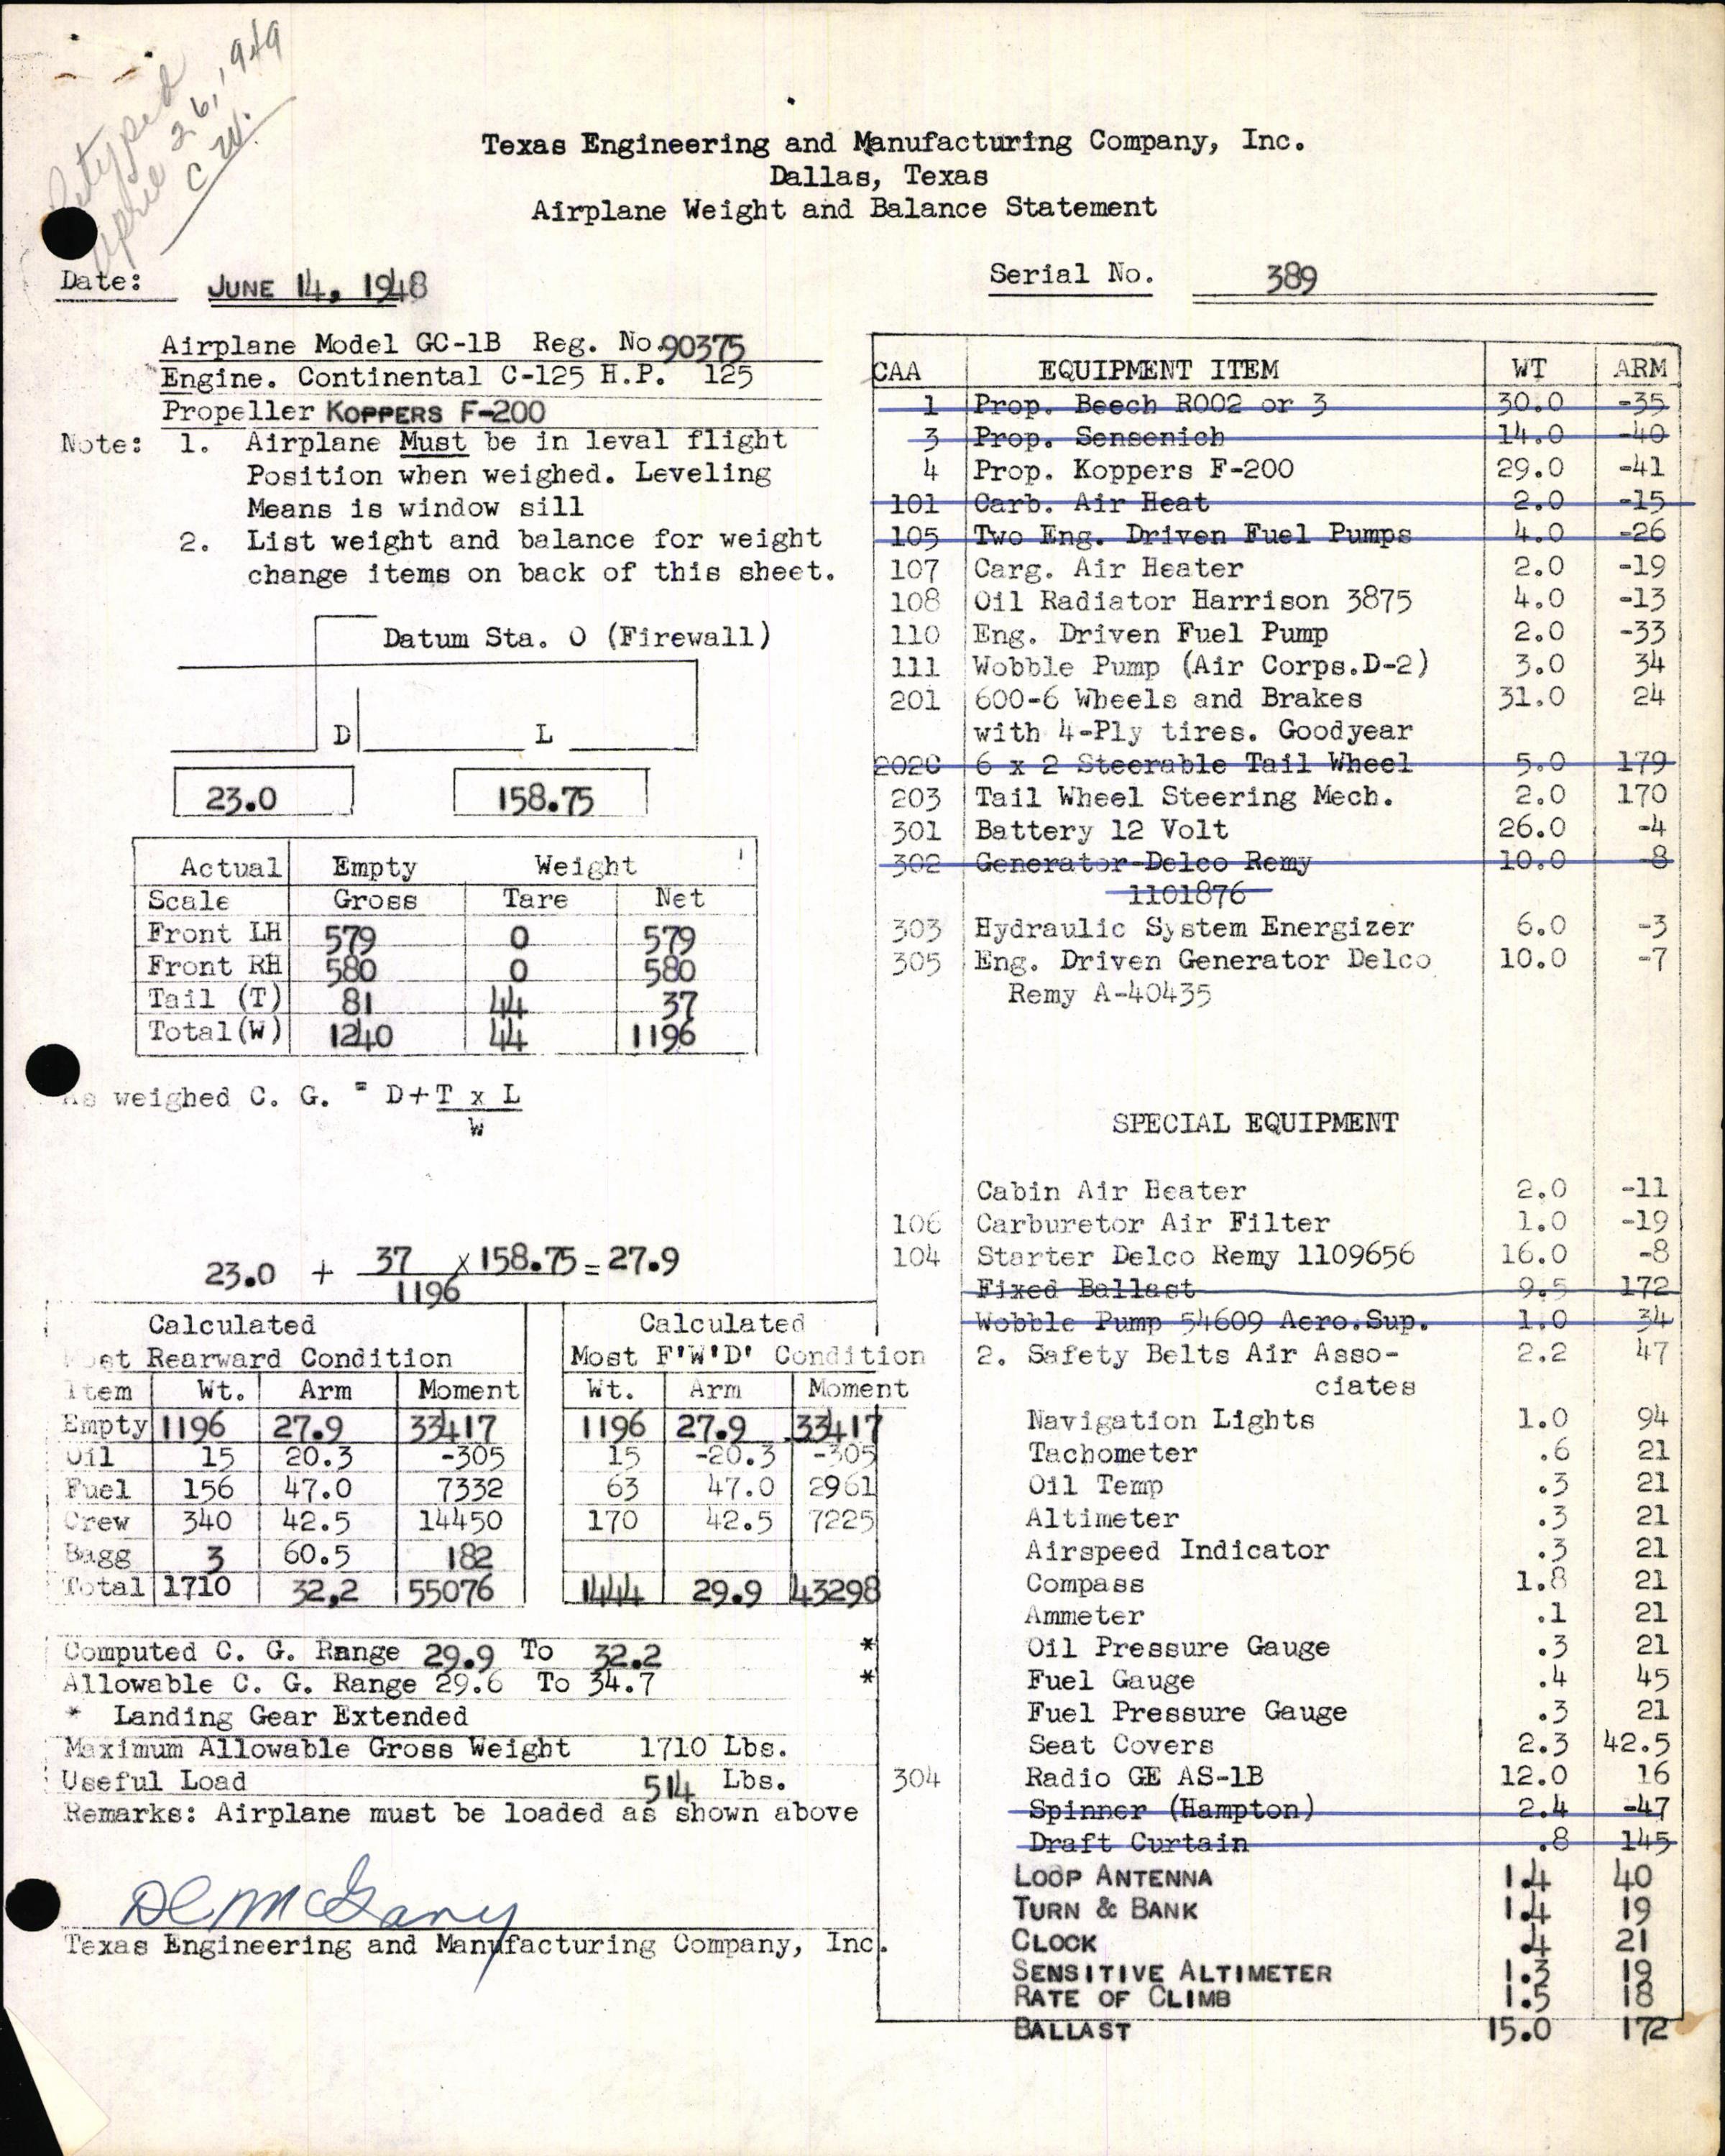 Sample page 7 from AirCorps Library document: Technical Information for Serial Number 389